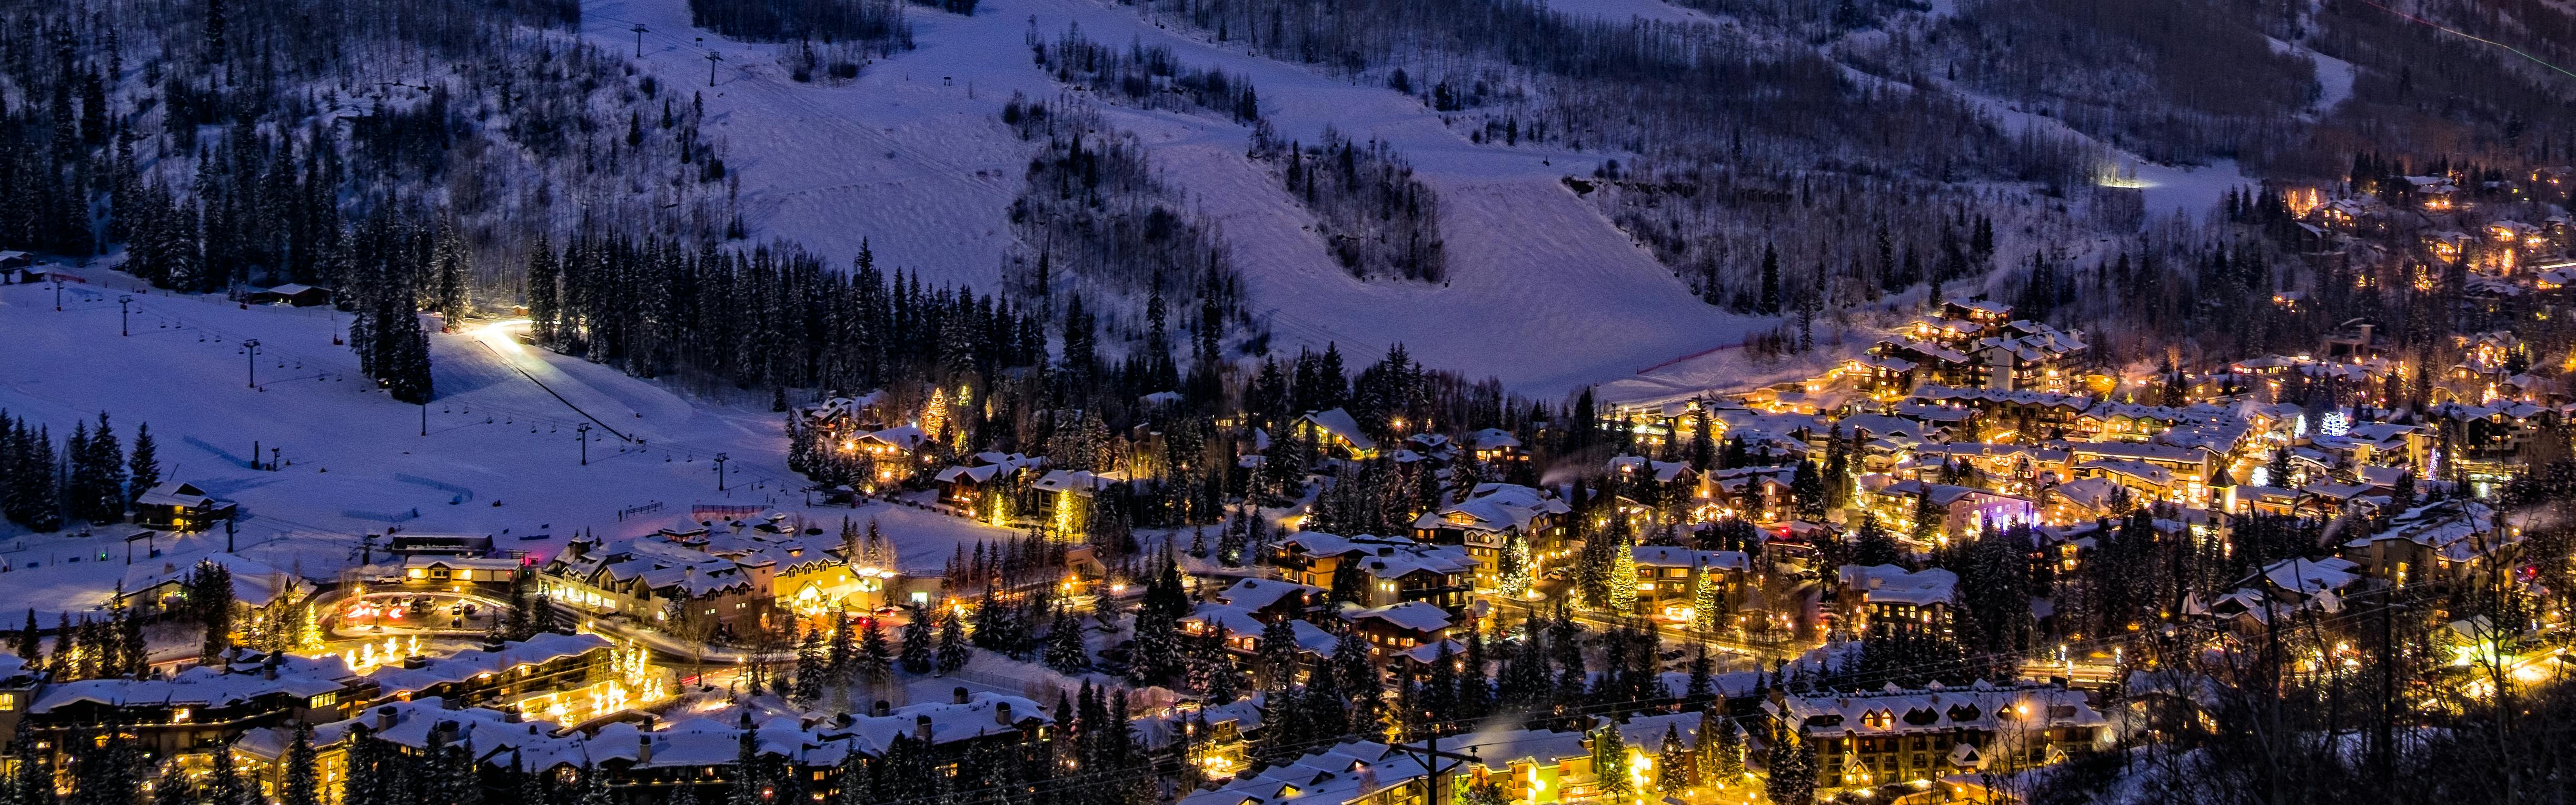 Houses and buildings at the foot of a ski hill lit up for the night